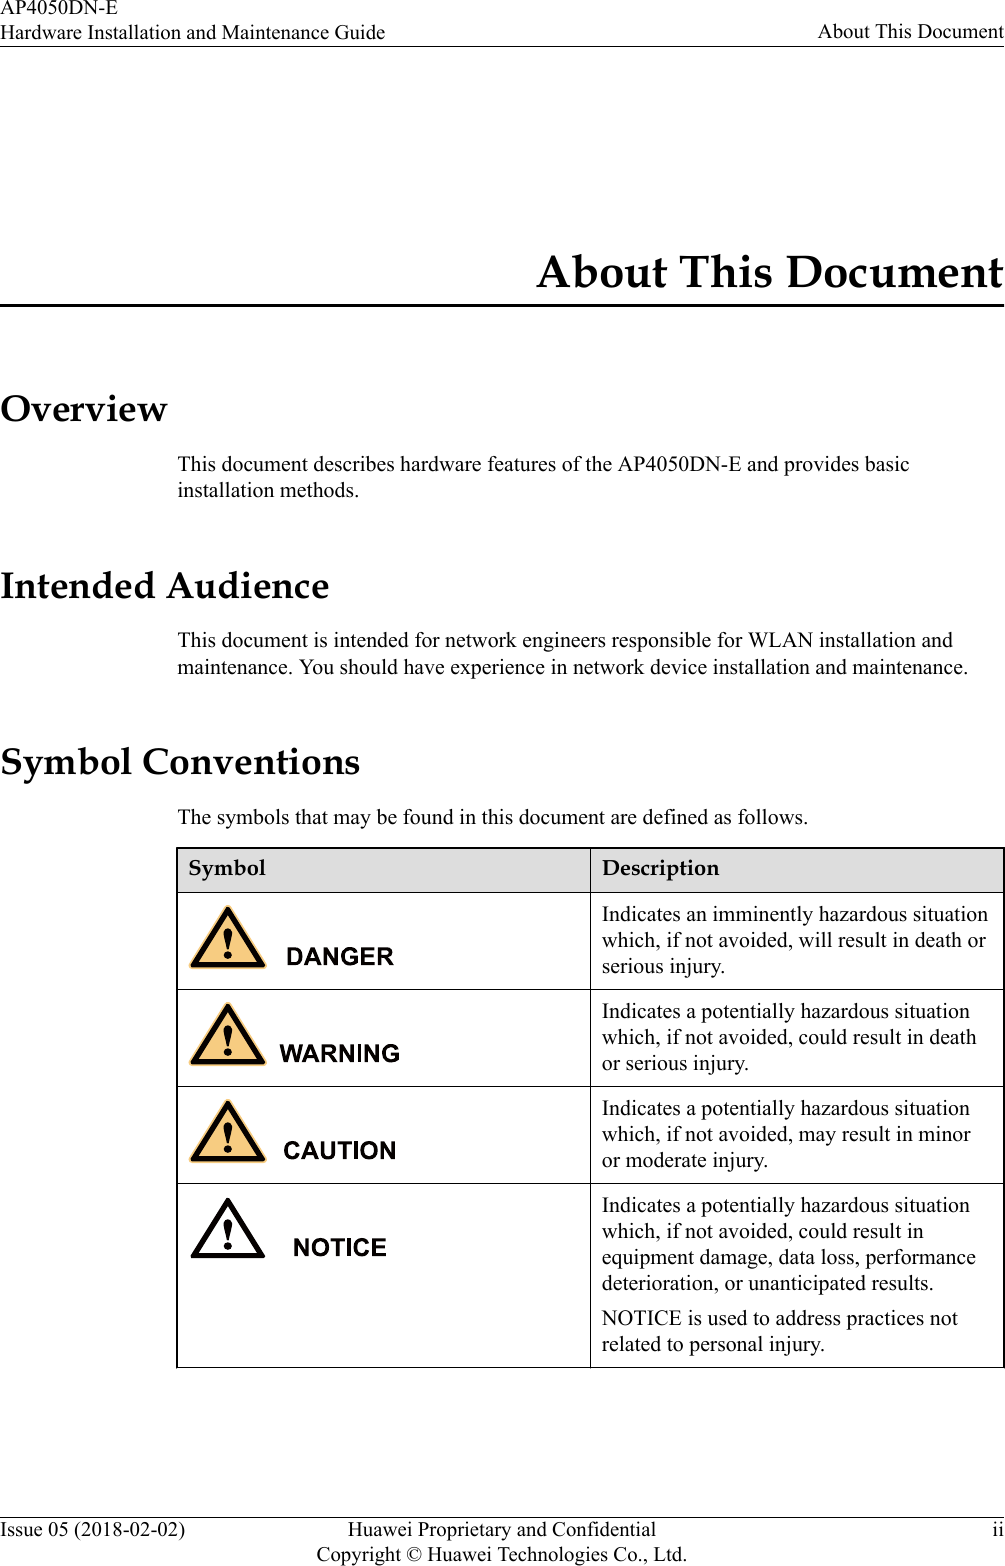 About This DocumentOverviewThis document describes hardware features of the AP4050DN-E and provides basicinstallation methods.Intended AudienceThis document is intended for network engineers responsible for WLAN installation andmaintenance. You should have experience in network device installation and maintenance.Symbol ConventionsThe symbols that may be found in this document are defined as follows.Symbol DescriptionIndicates an imminently hazardous situationwhich, if not avoided, will result in death orserious injury.Indicates a potentially hazardous situationwhich, if not avoided, could result in deathor serious injury.Indicates a potentially hazardous situationwhich, if not avoided, may result in minoror moderate injury.Indicates a potentially hazardous situationwhich, if not avoided, could result inequipment damage, data loss, performancedeterioration, or unanticipated results.NOTICE is used to address practices notrelated to personal injury.AP4050DN-EHardware Installation and Maintenance Guide About This DocumentIssue 05 (2018-02-02) Huawei Proprietary and ConfidentialCopyright © Huawei Technologies Co., Ltd.ii